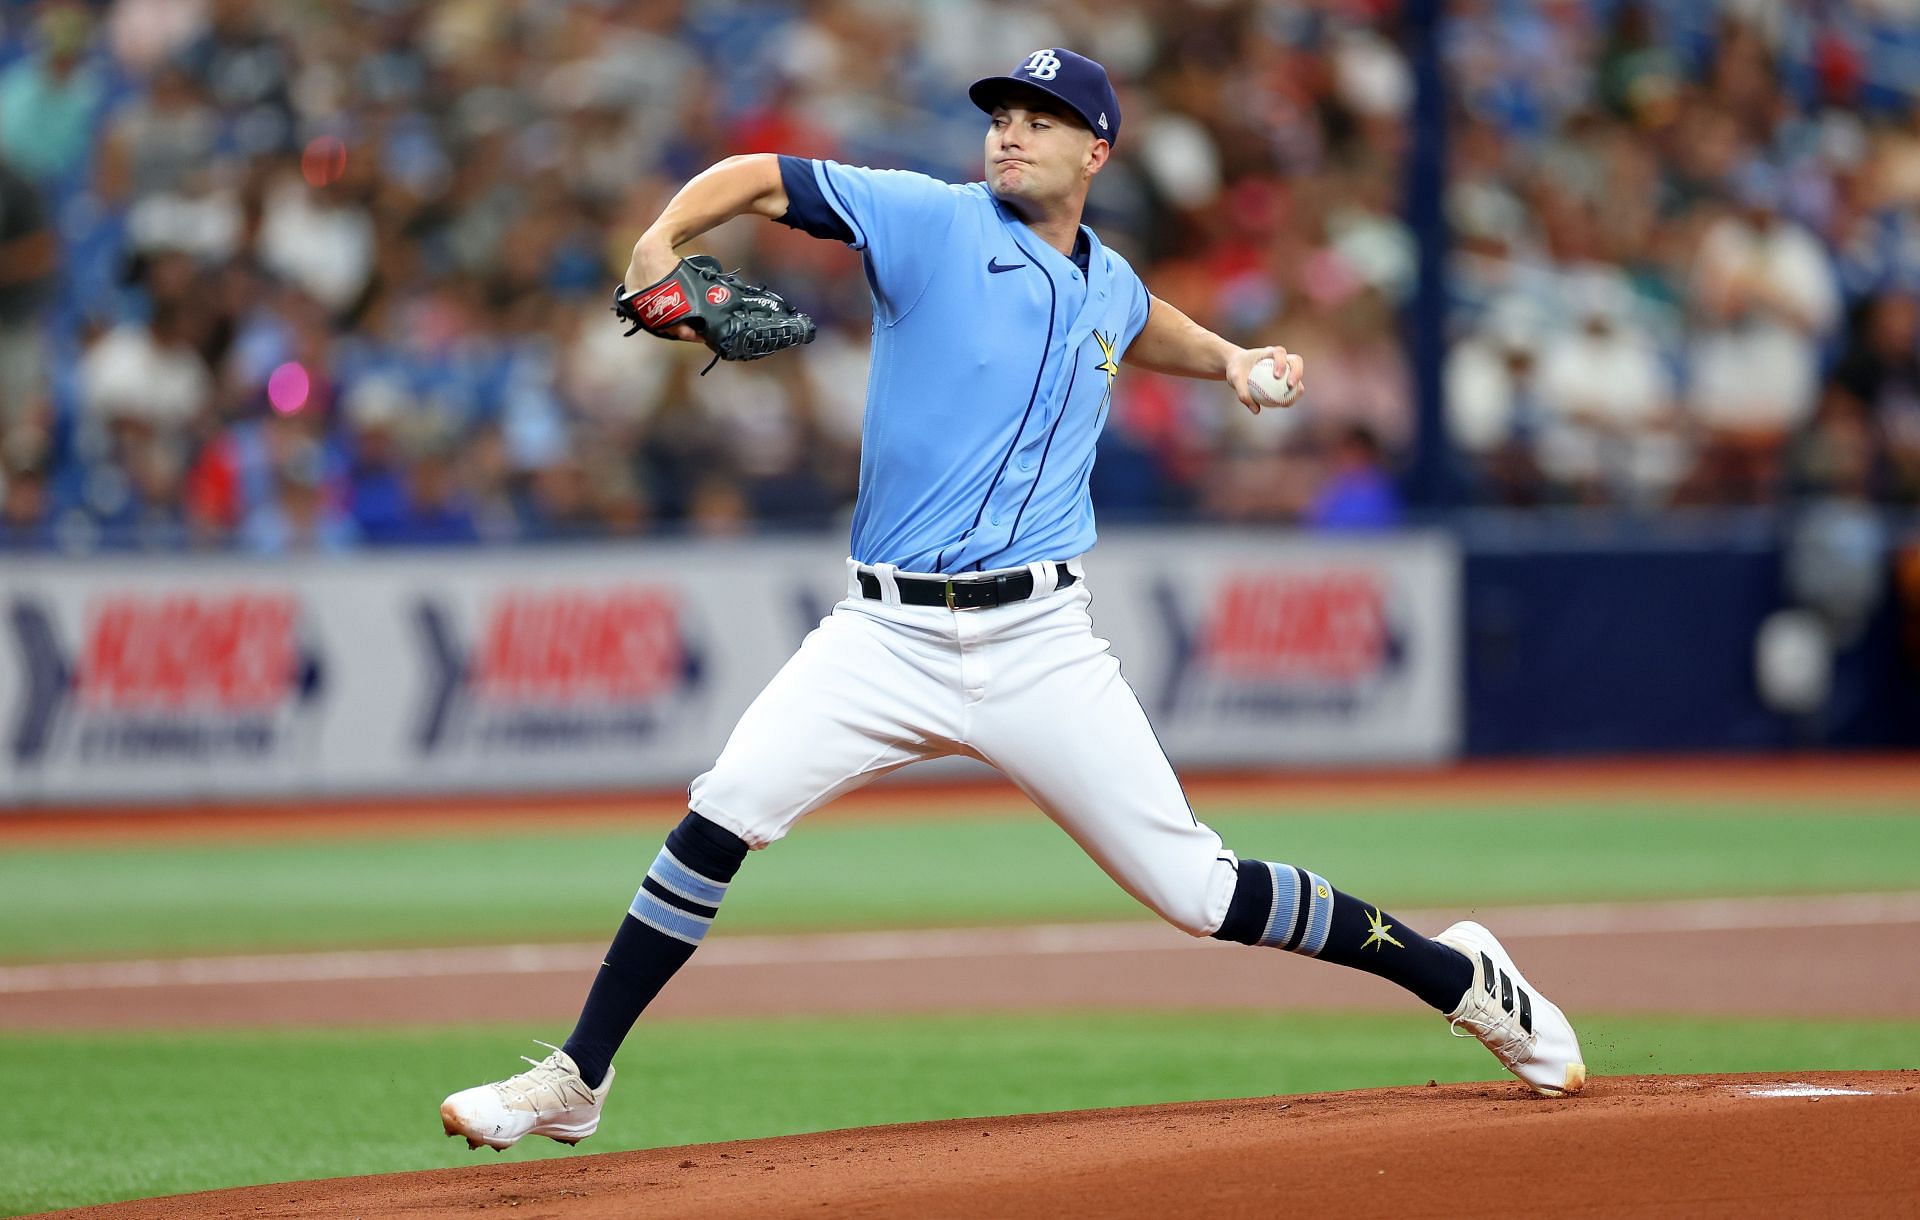 Shane McClanahan of the Tampa Bay Rays pitches against the Texas Rangers